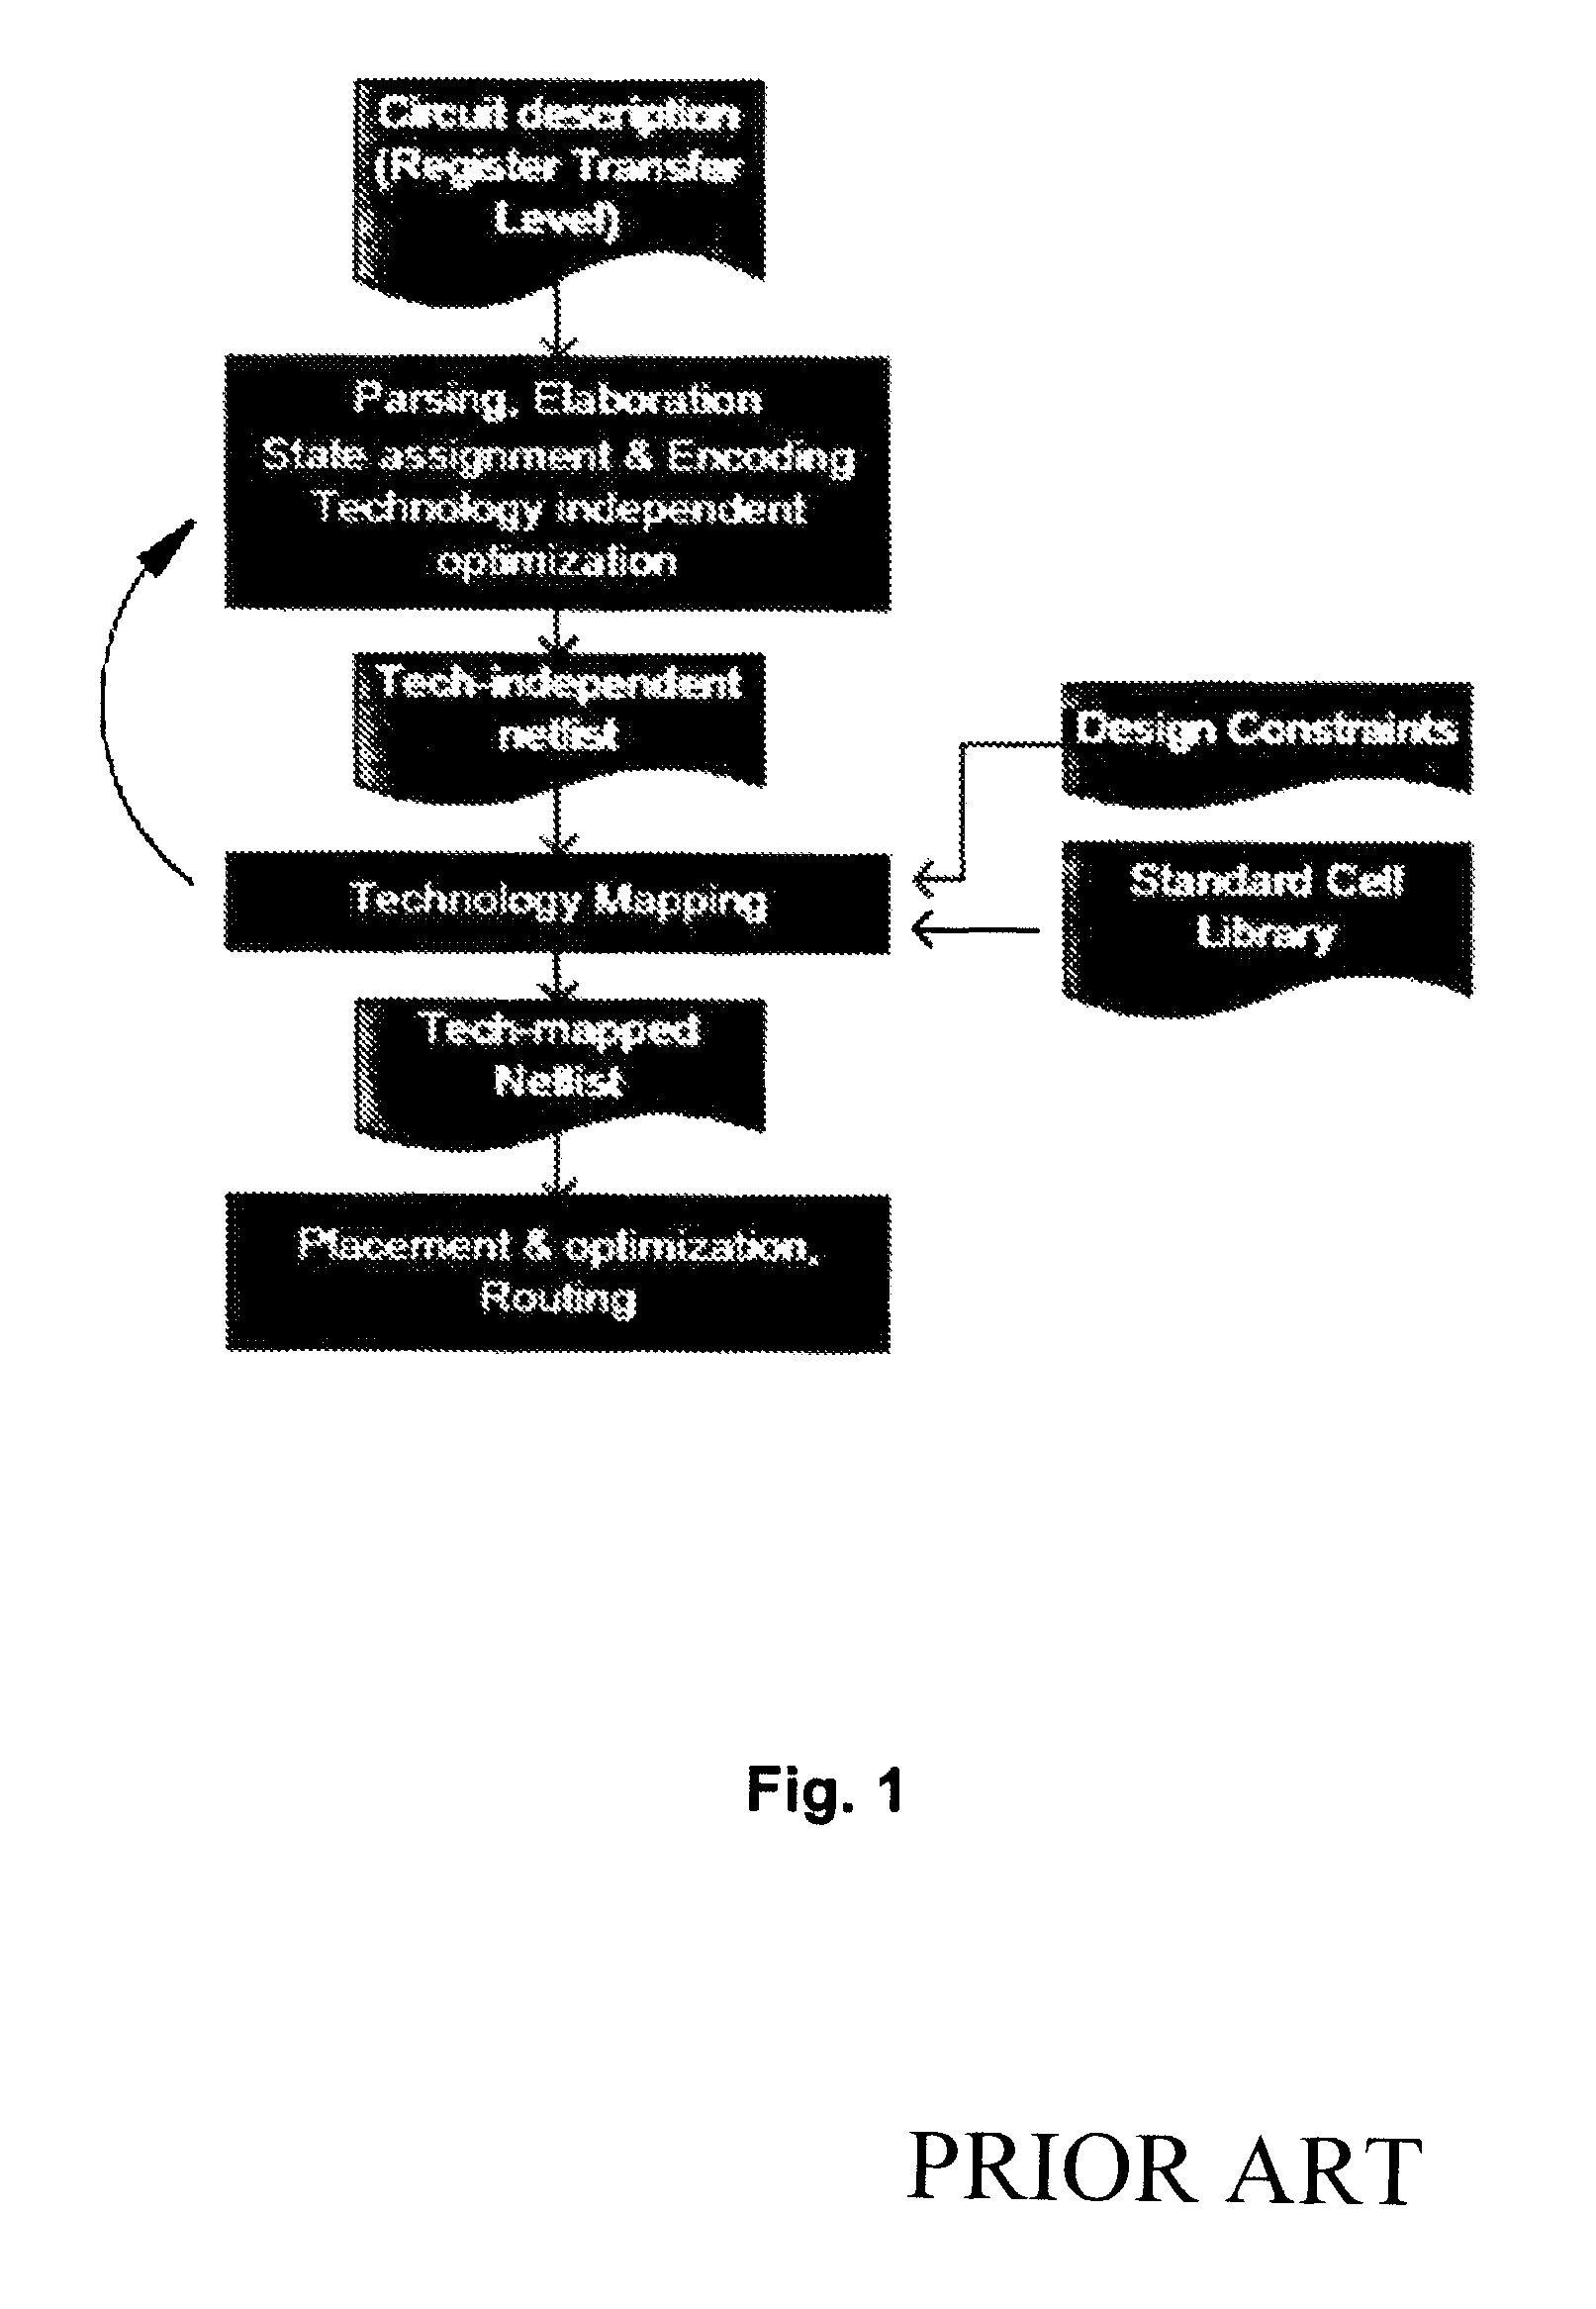 Method for mapping a Boolean logic network to a limited set of application-domain specific logic cells